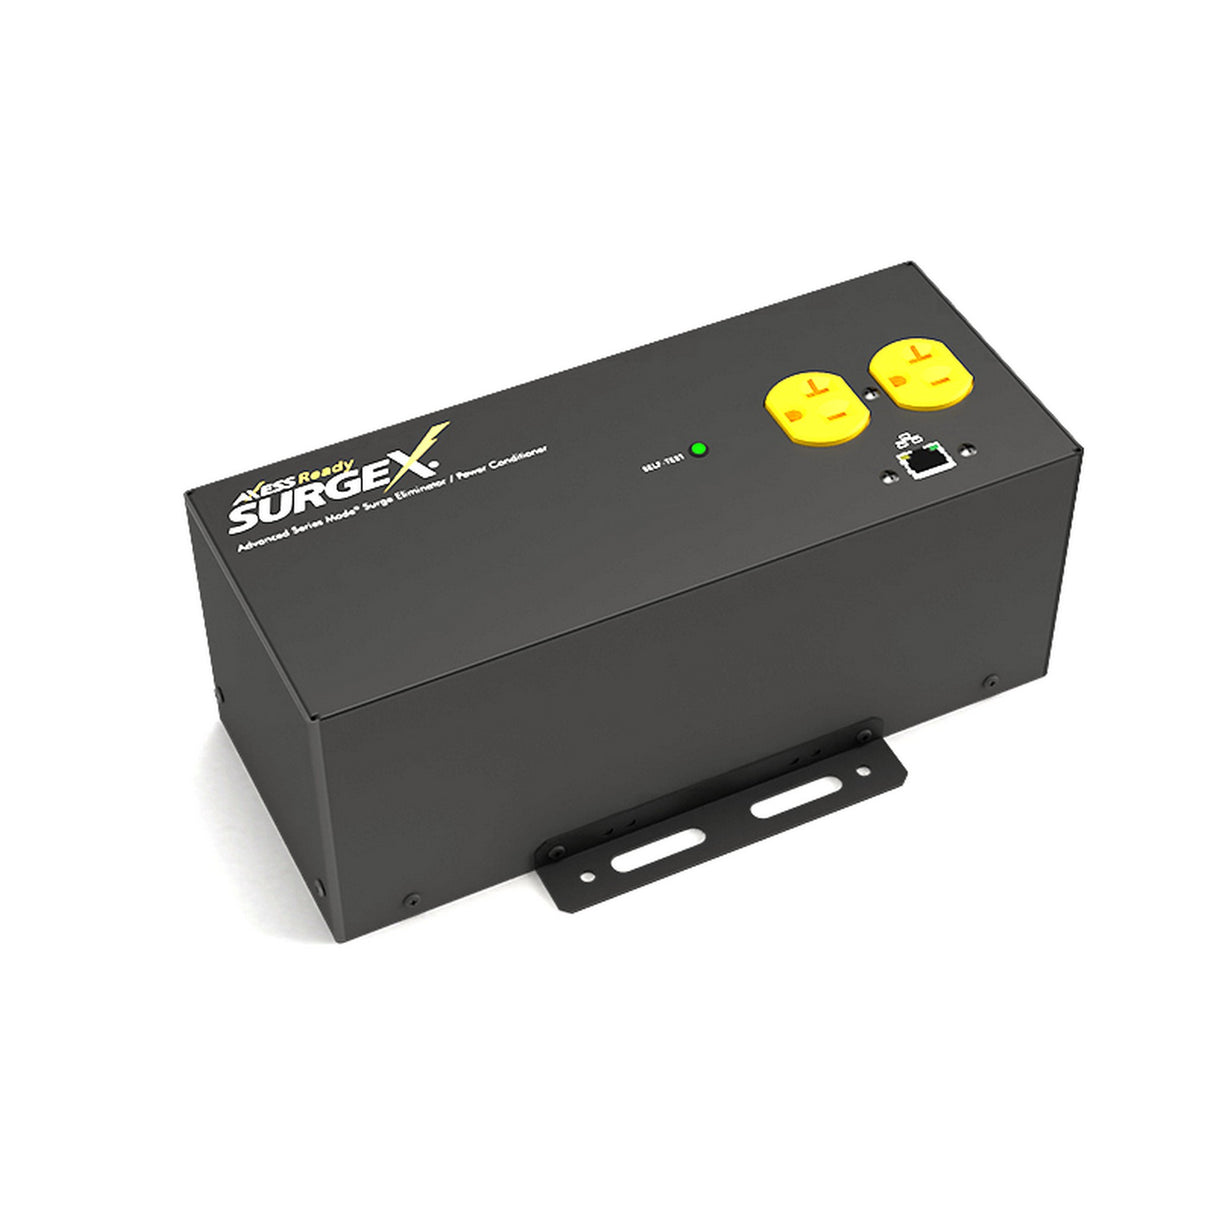 SurgeX SA-20-AR IP Connected 2 Receptacle Surge Eliminator and Power Conditioner, 120V/20A